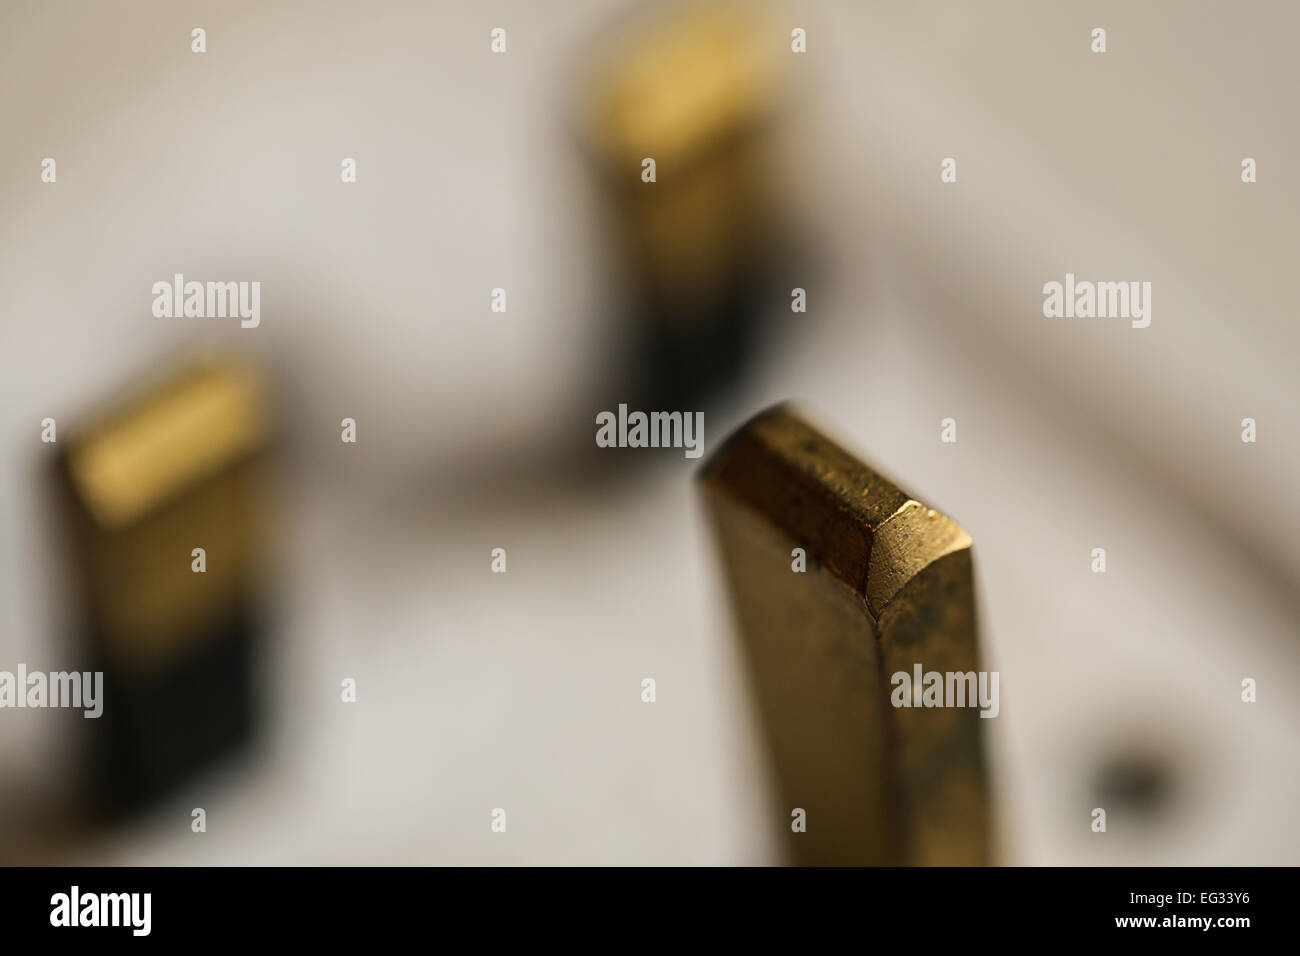 Three pins Cut Out Stock Images & Pictures - Page 2 - Alamy